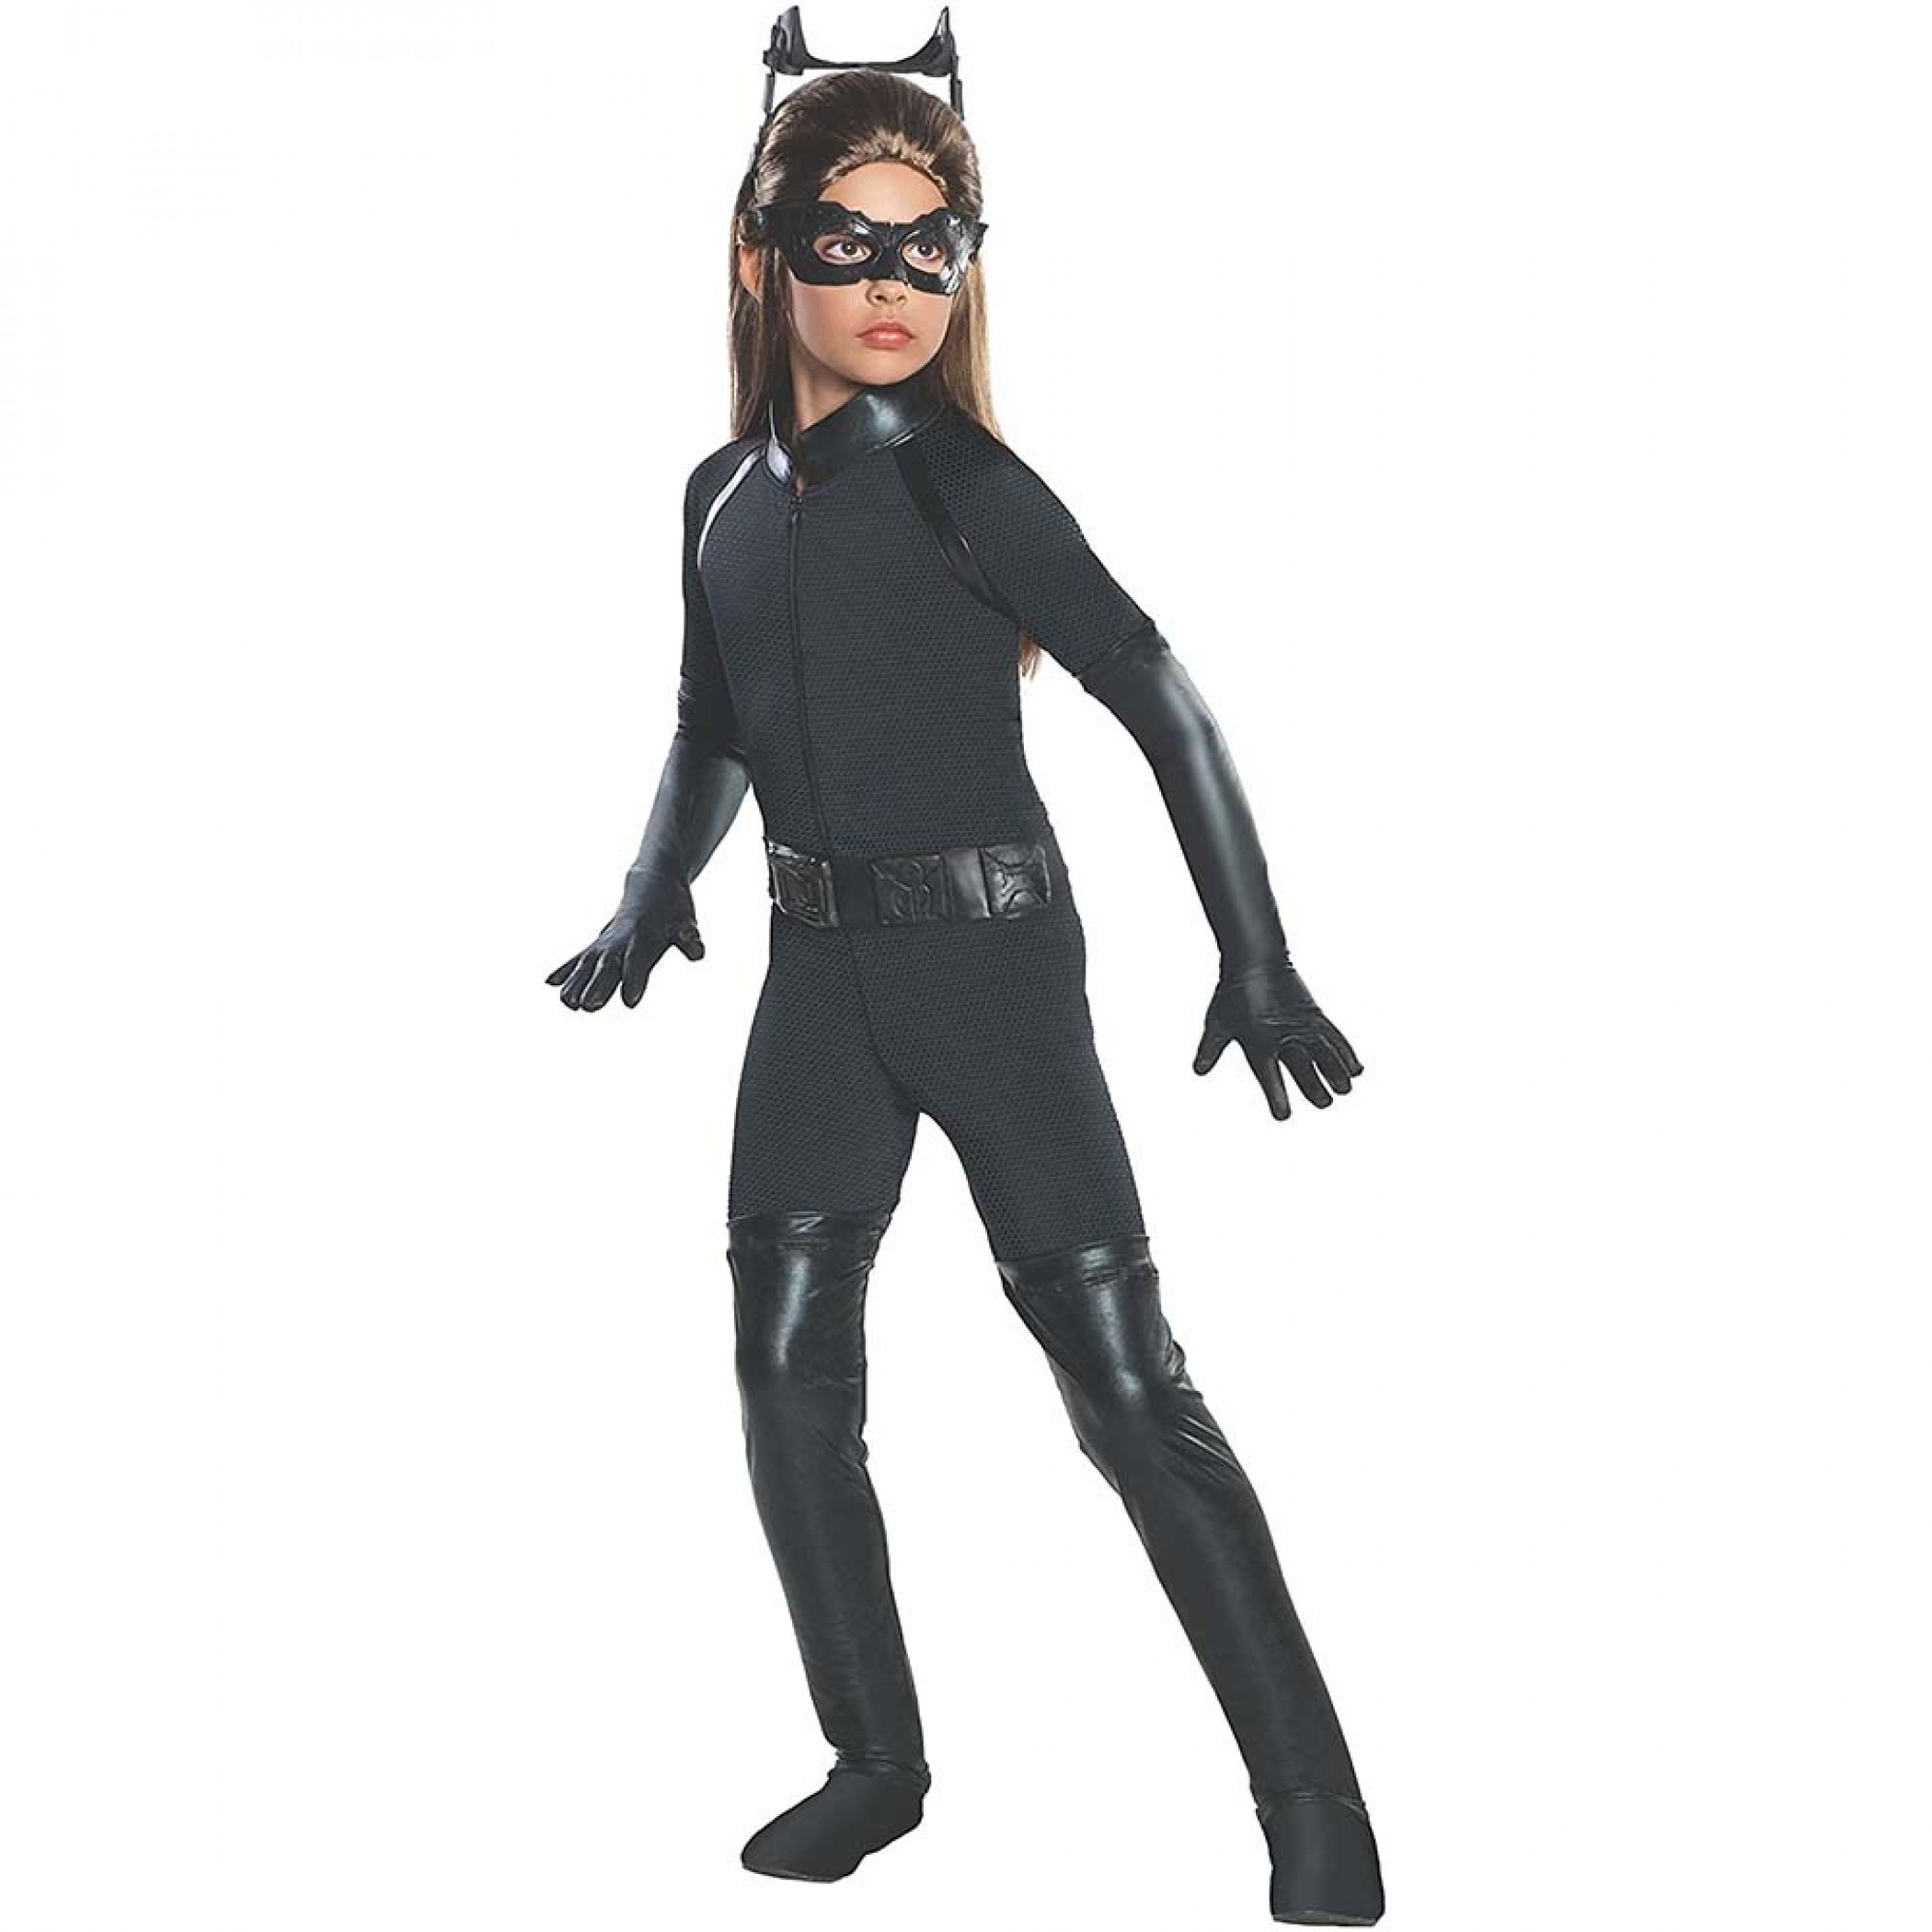 Girl's Deluxe Catwoman Halloween Costume - Dark Knight Trilogy - image 1 of 4